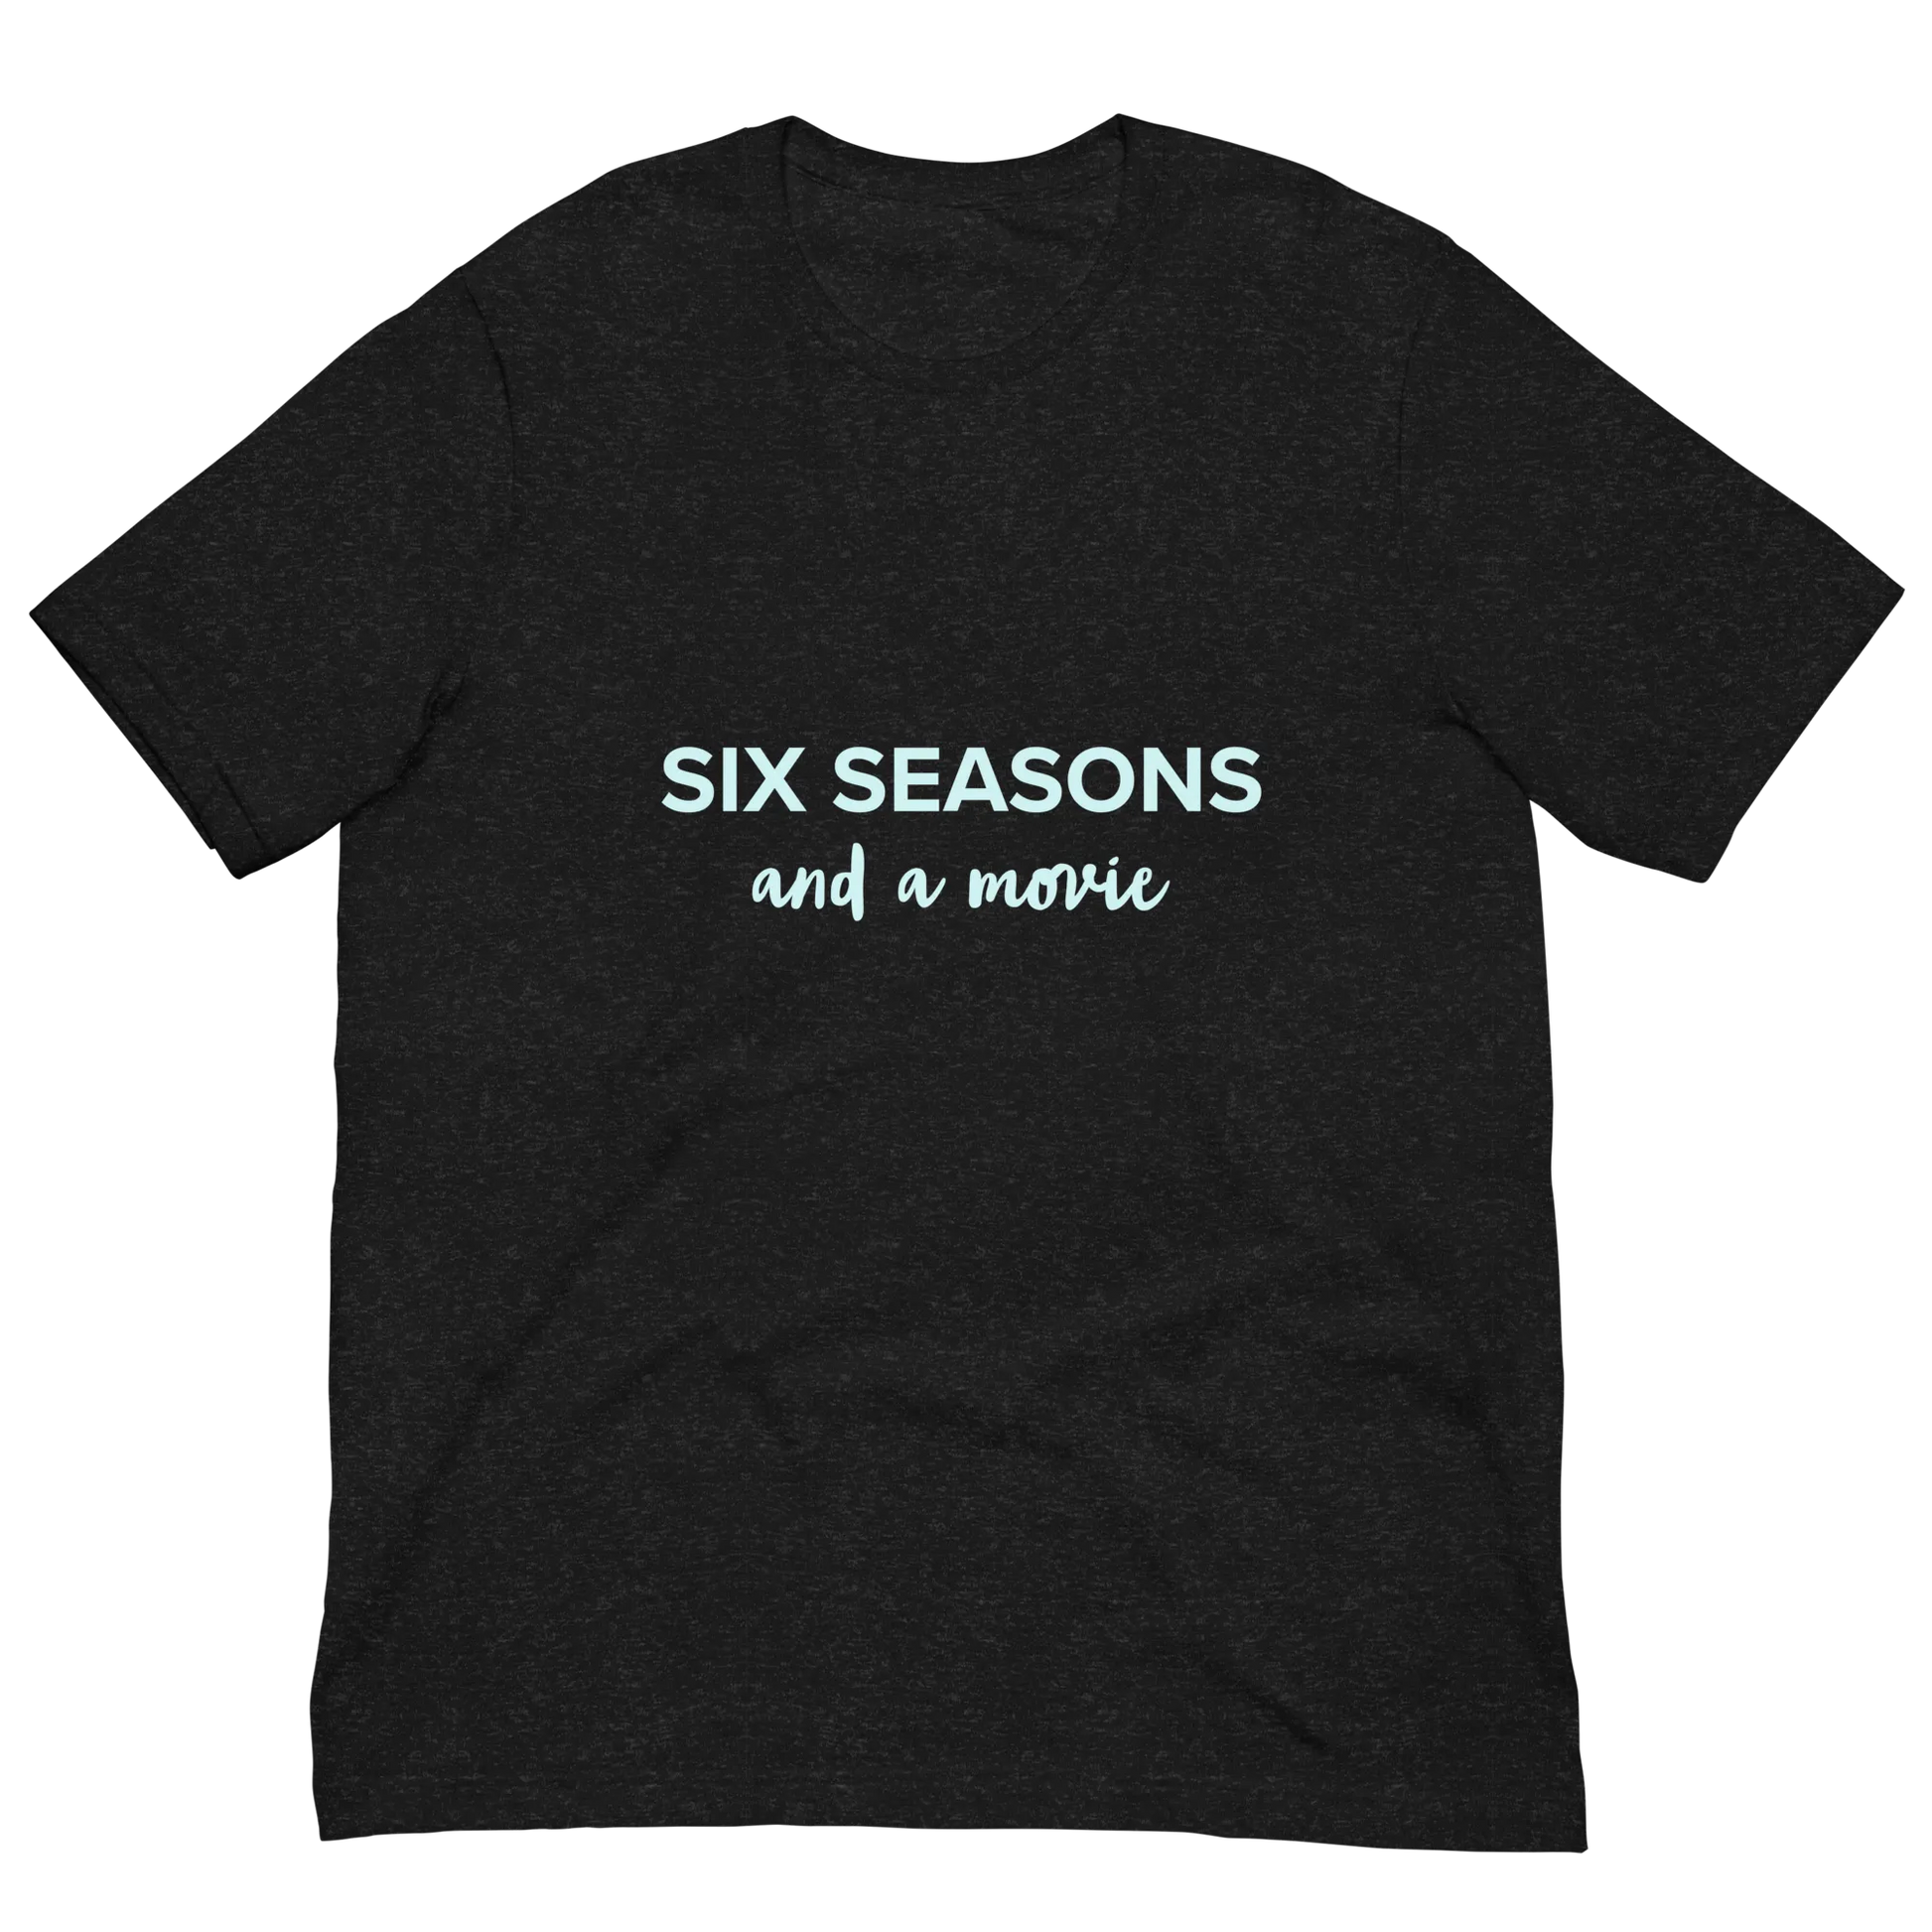 Six Seasons and a Movie Tee in Black Heather Plus-size flatlay